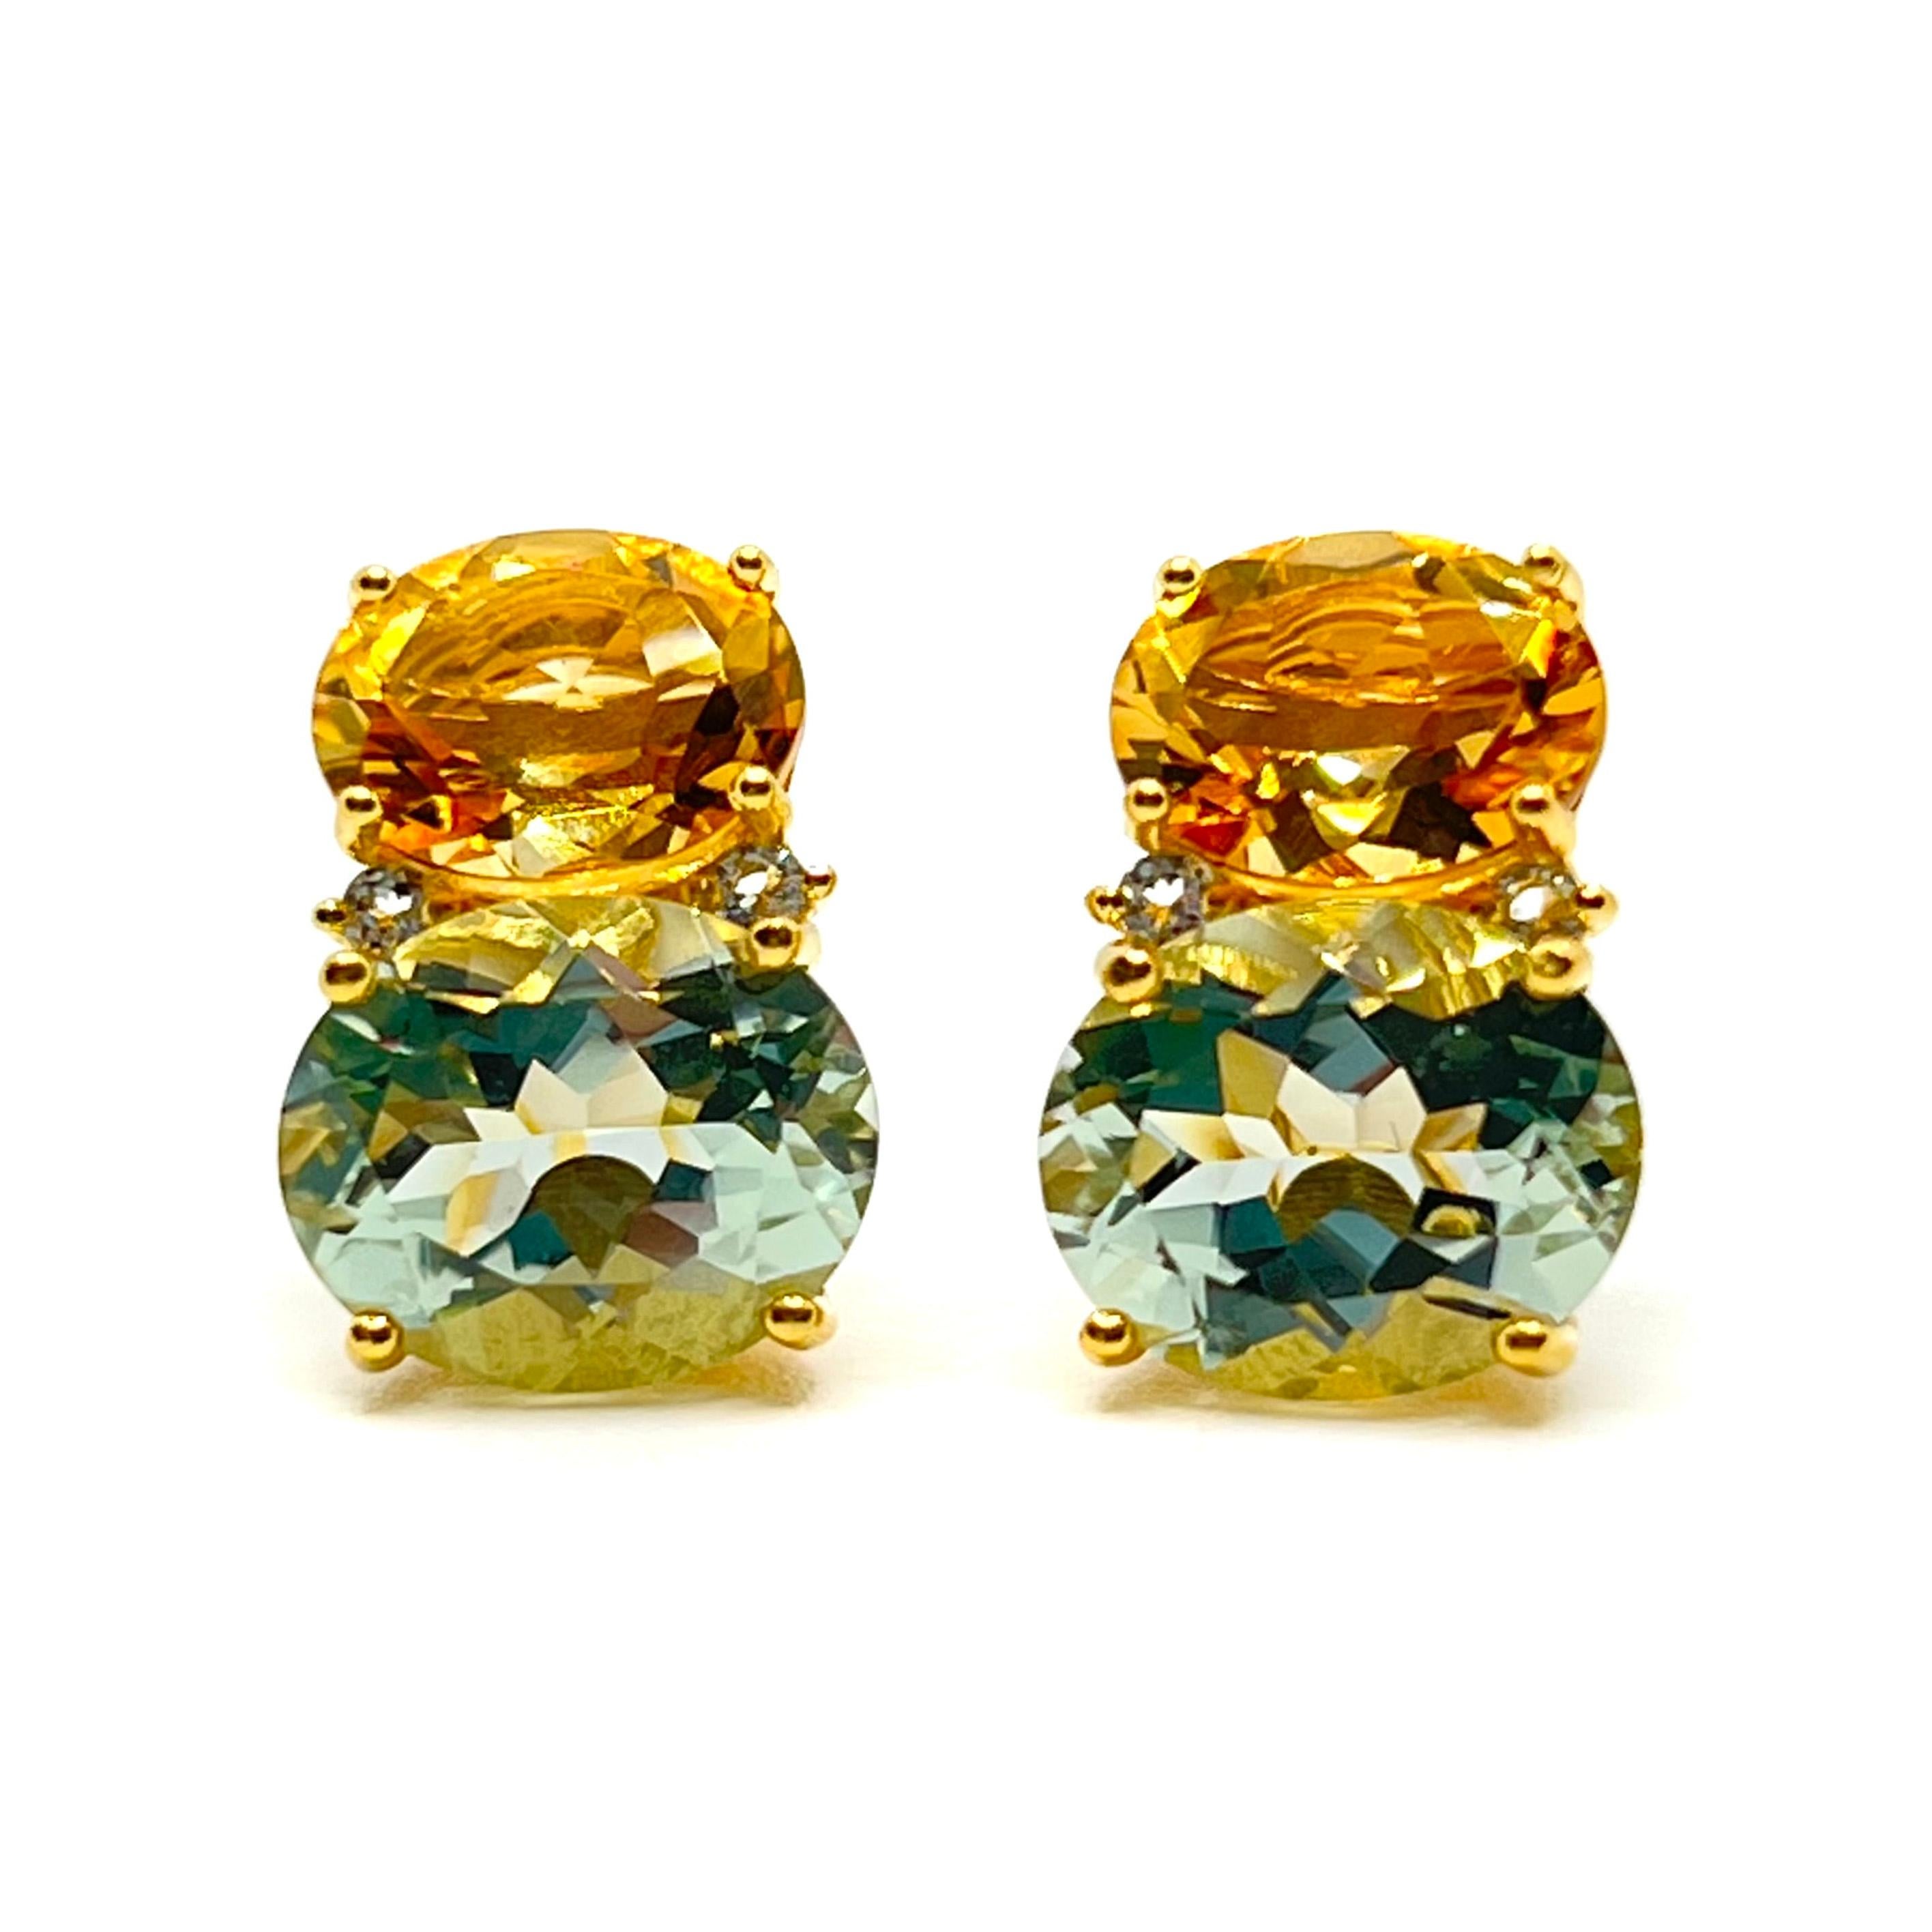 These stunning pair of earrings features a pair of genuine oval Brazilian citrine, pastel green prasiolite, adorned with round white topaz on the side, handset in 18k yellow gold vermeil over sterling silver. The golden yellow and pastel green